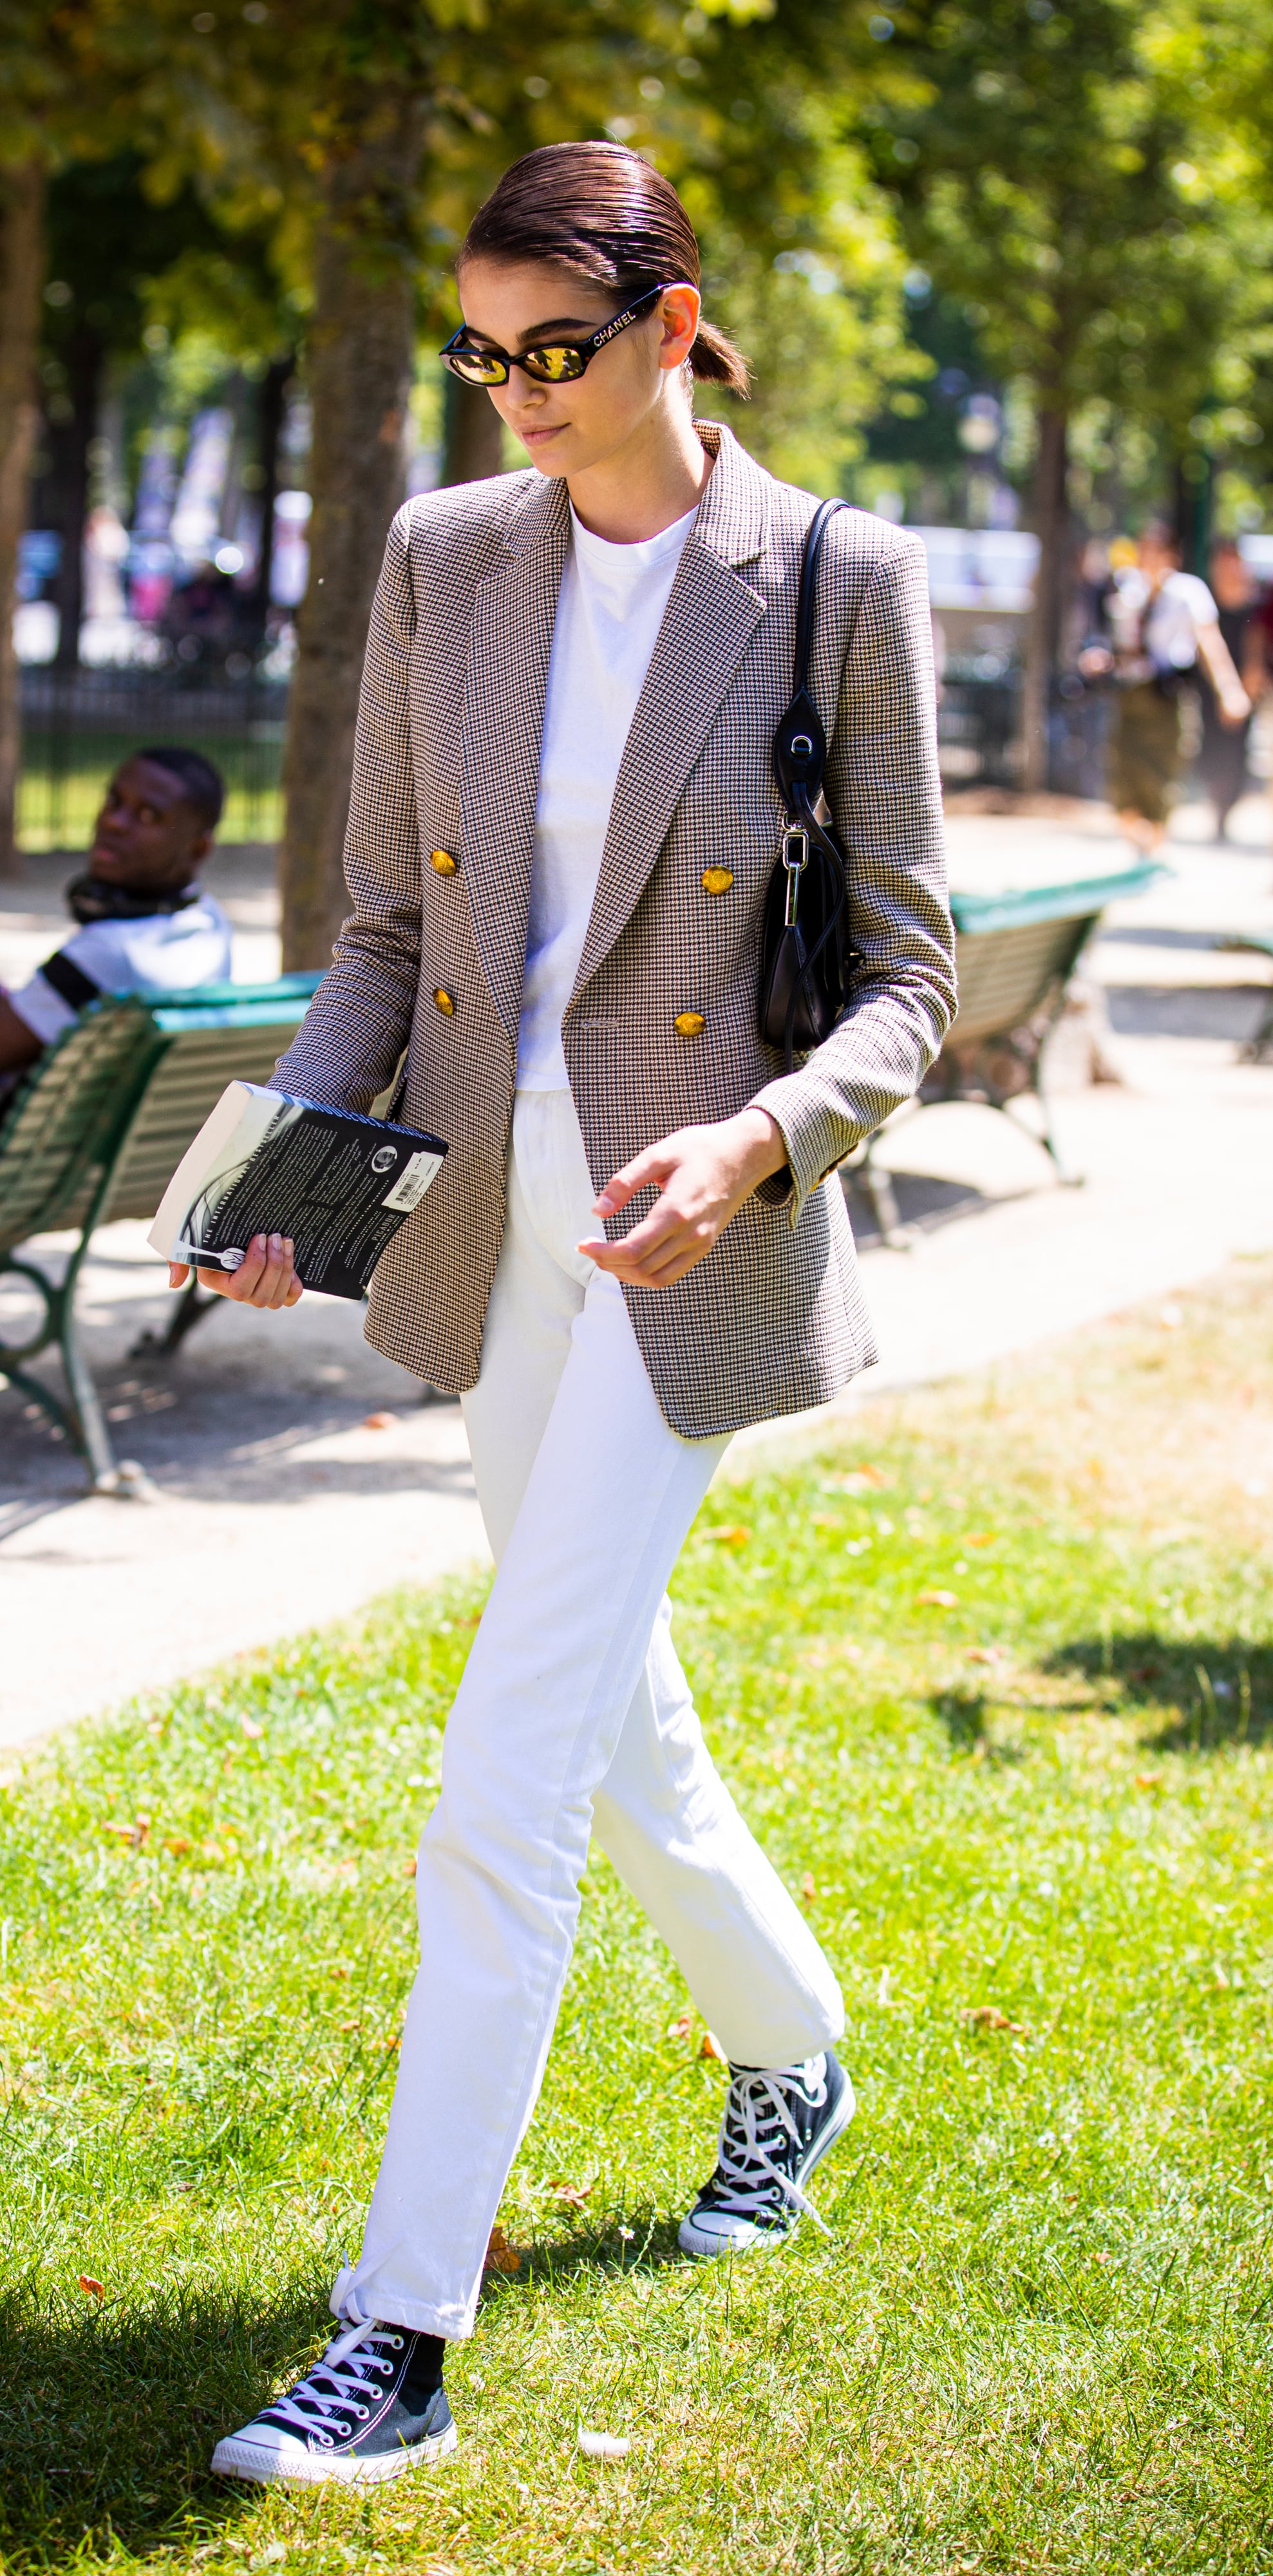 Style Your With: A Blazer, Jeans, Sneakers | This Is How Celebrities Wear a Simple T-Shirt | POPSUGAR Fashion Photo 32